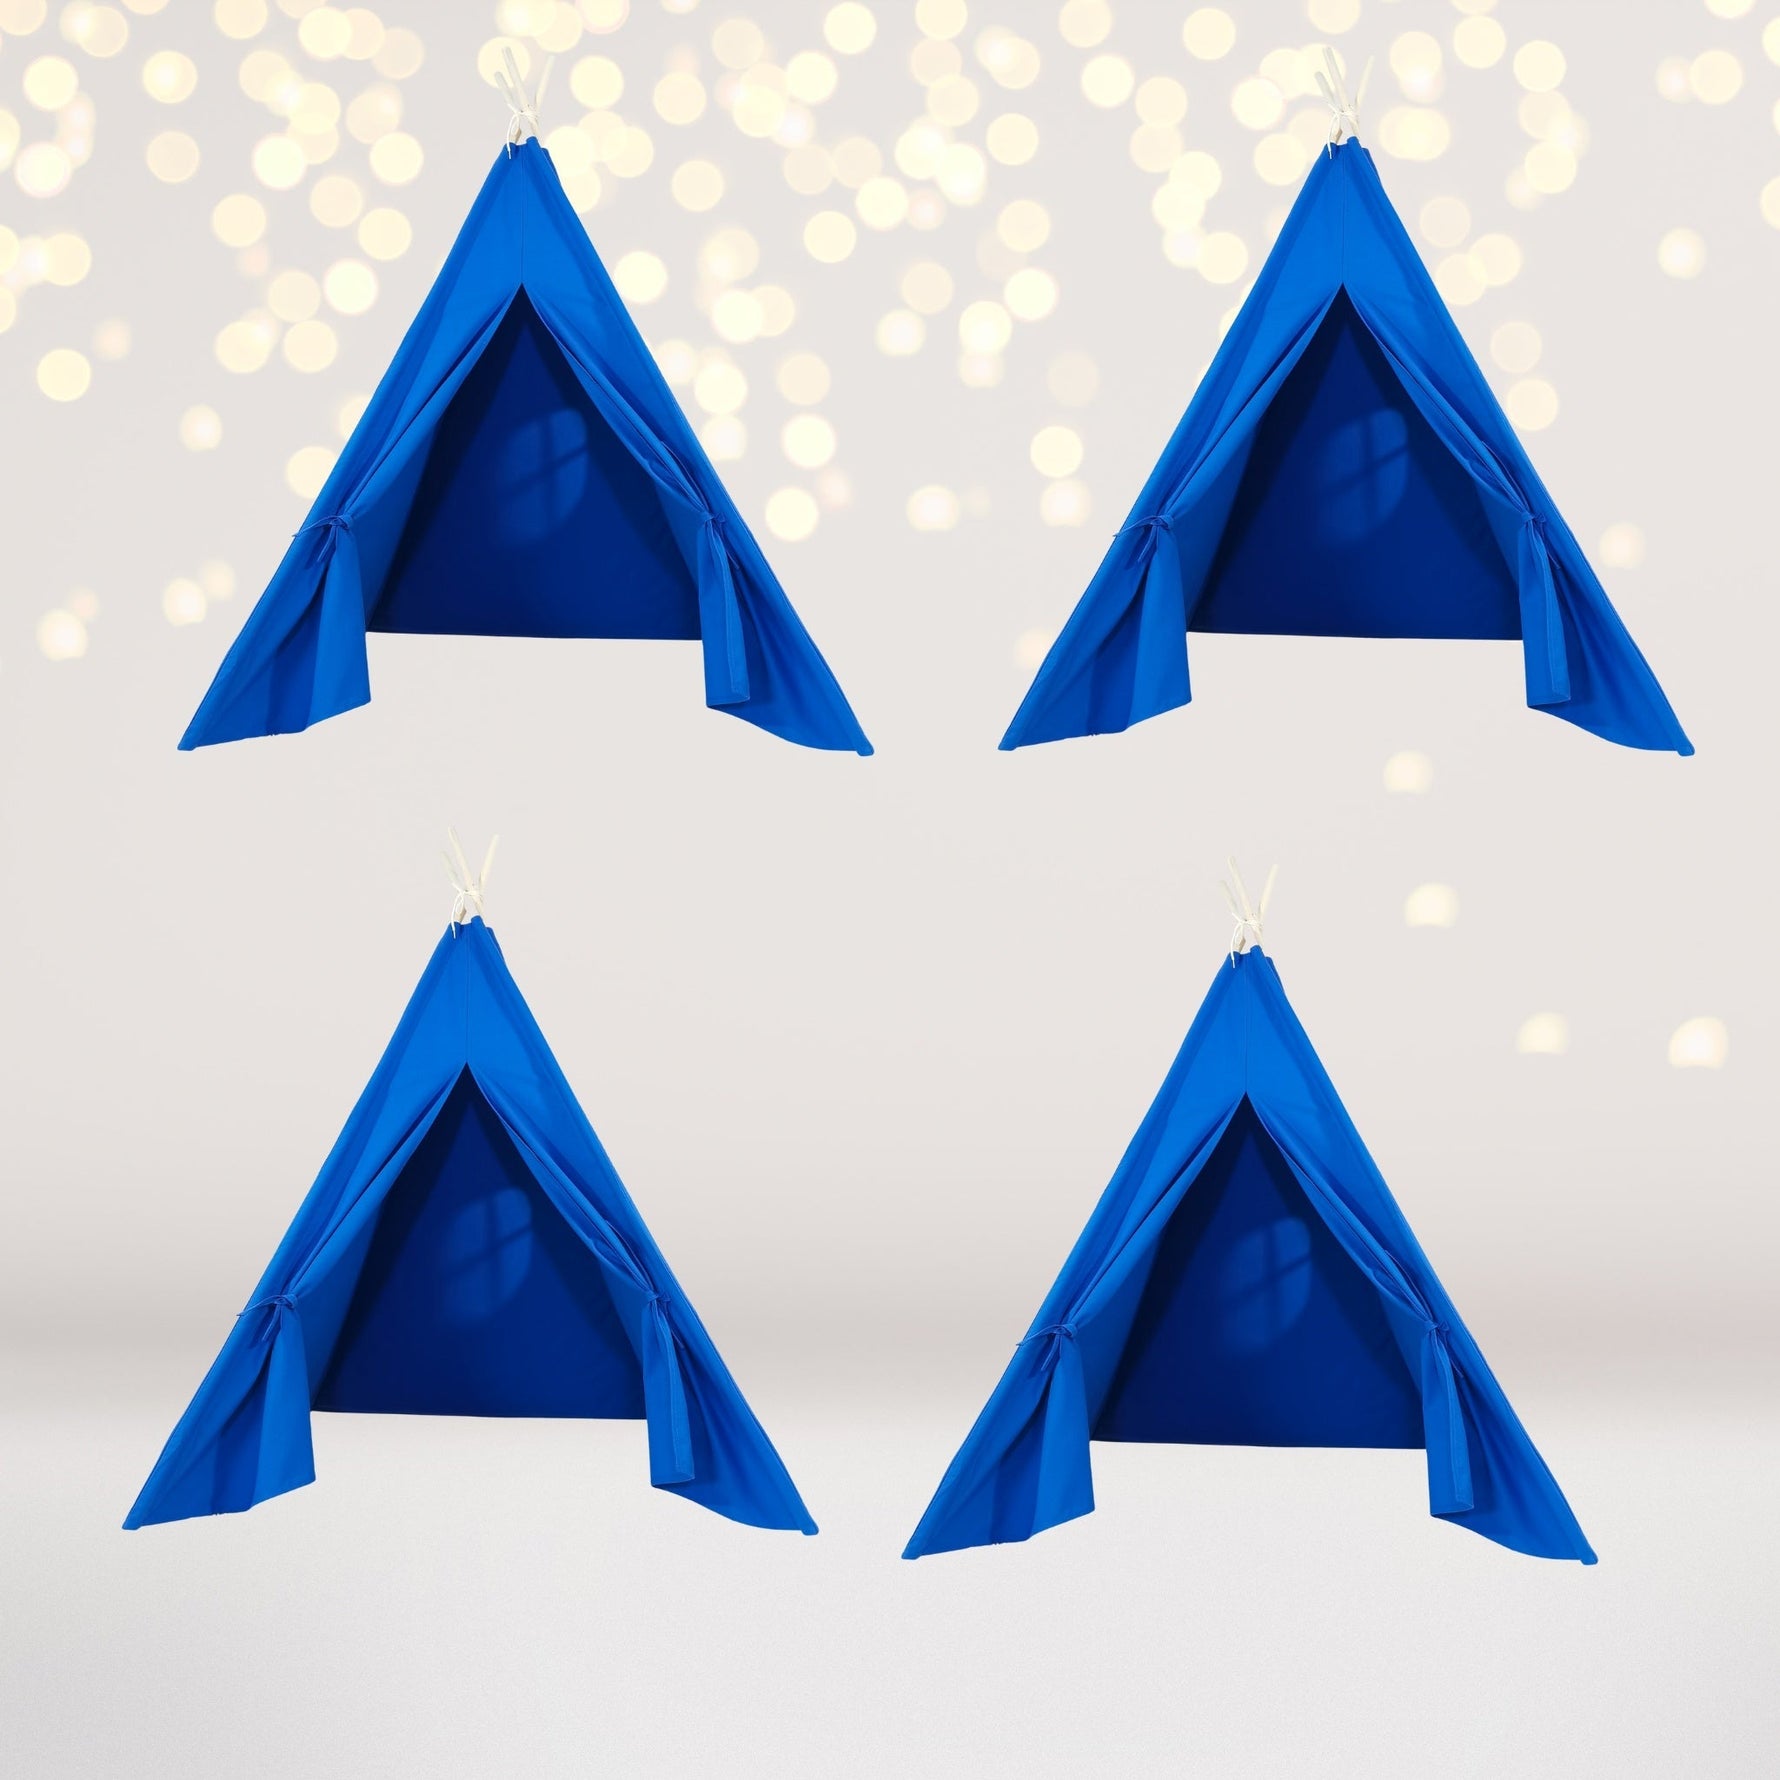 4 pack Kids Sleepover Tents-LUXE Kids Teepee Tent with Lights-Party Pack Royal Blue